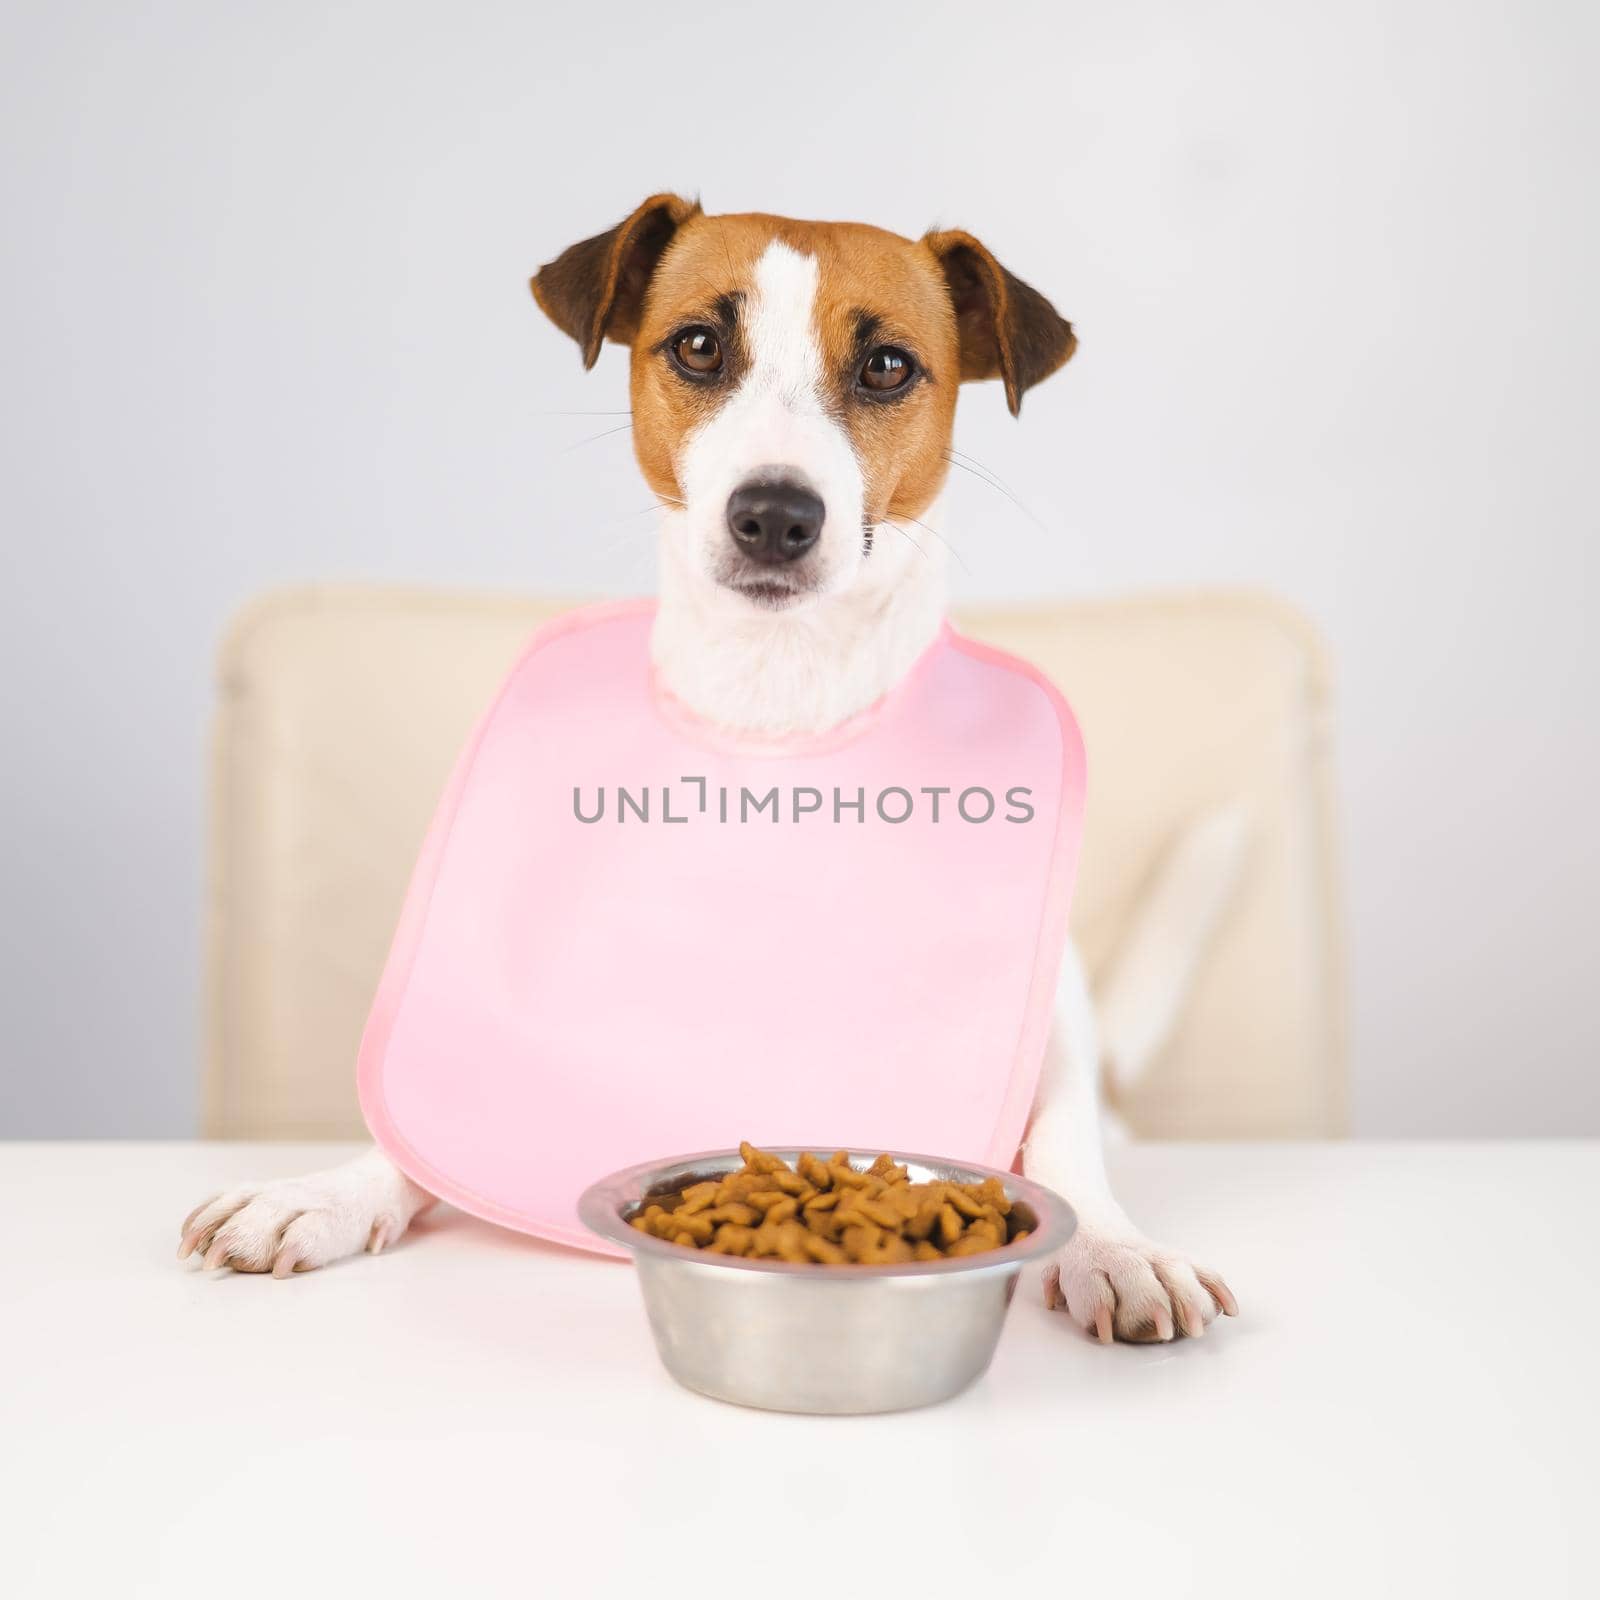 Dog jack russell terrier at the dinner table in a pink bib. by mrwed54